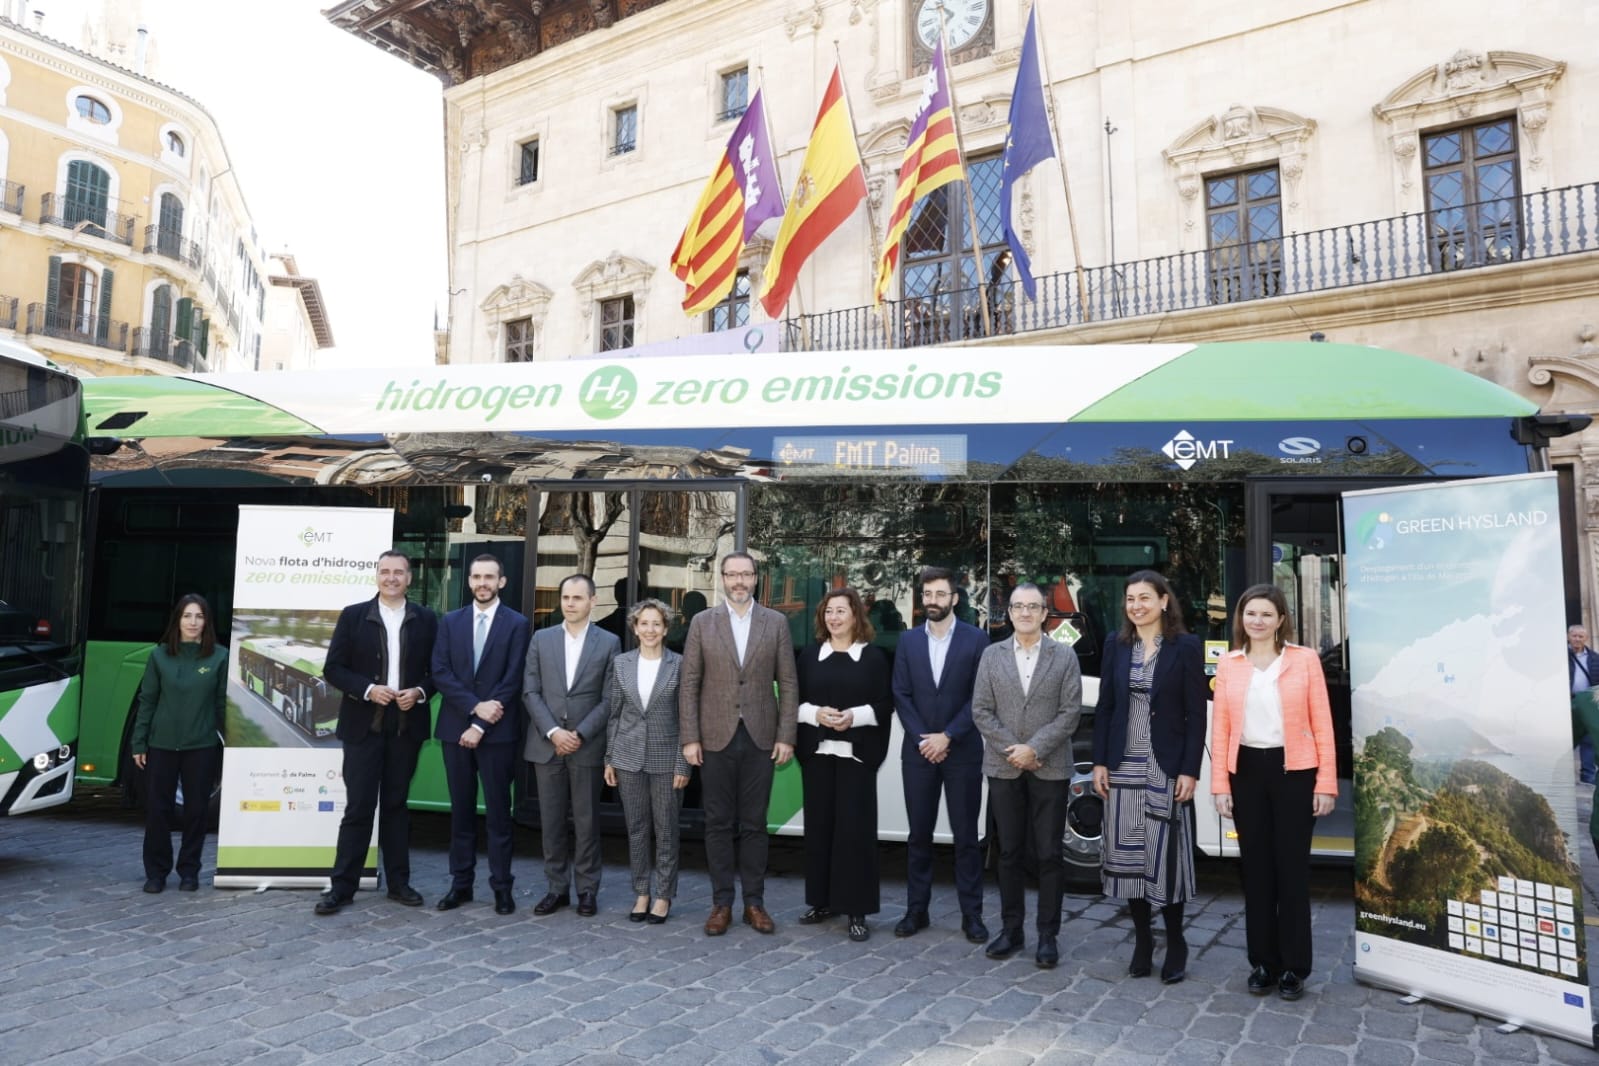 EMT Palma presents its first green hydrogen buses